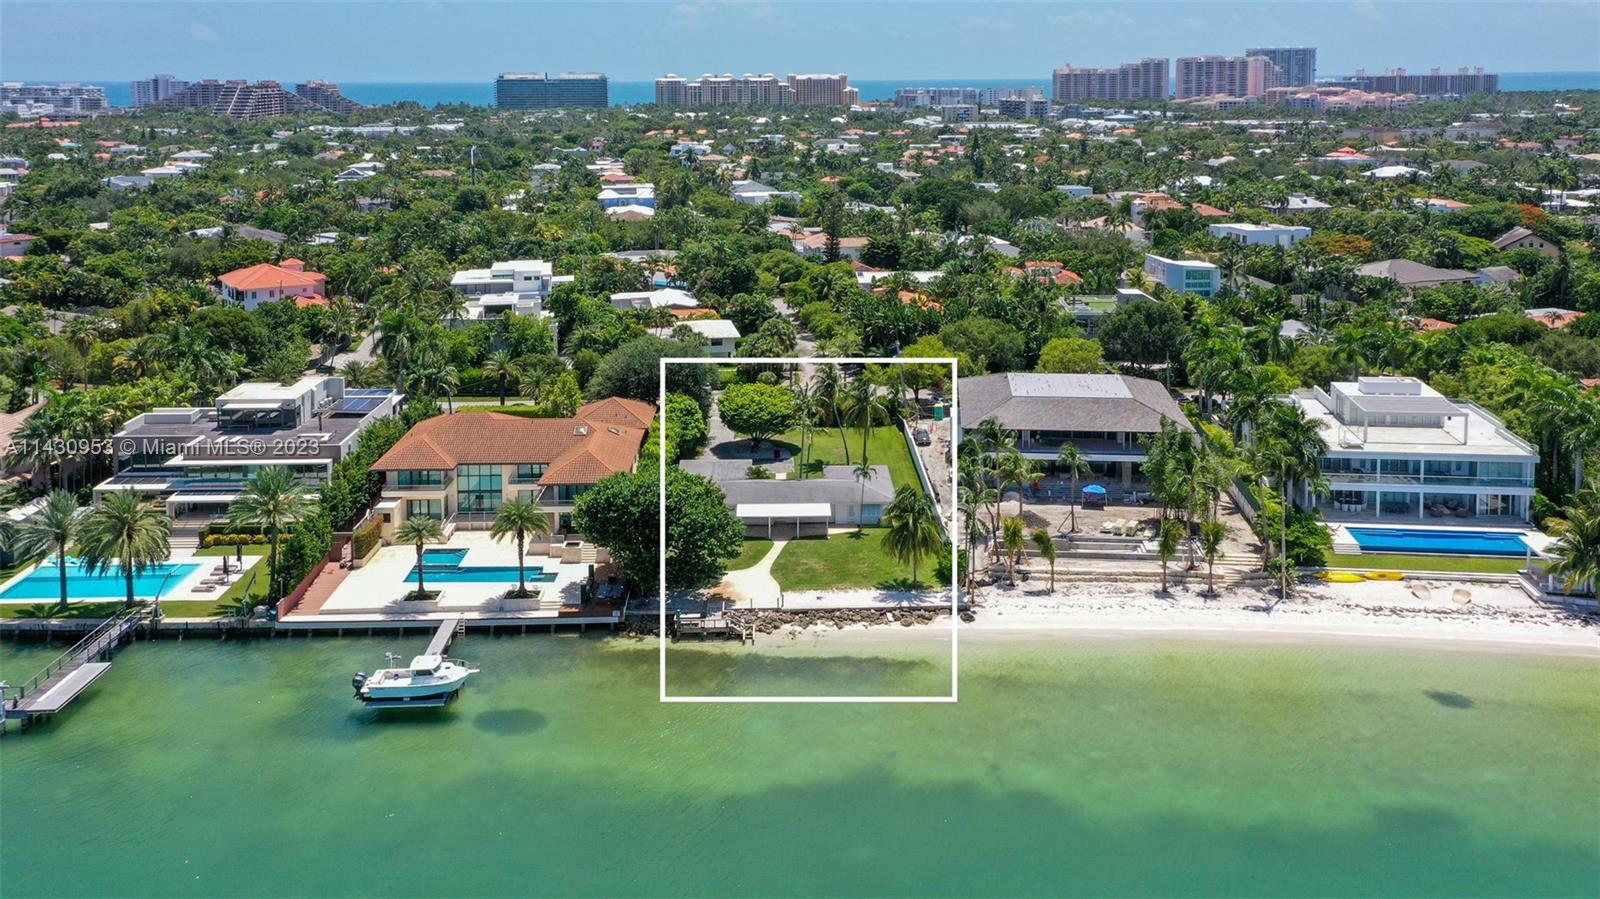 Truly a trophy property ready to be developed.The original cottage on this unique 20,933 sq. ft. lot, is nestled among some of the most coveted stately homes of Key Biscayne. It may be lived in while your new house project is ready. Watch the endless parade of boats as they cruise the shimmering waters of Biscayne Bay, or simply enjoy the spectacle of the always changing color palette of Miami Sunsets and night lights.  Watch an assortment of marine life stop by to greet you while you lounge in your bayfront backyard.The Key is a short ride away -10 to 15 minutes – from the excitement of Downtown Miami and the Beaches, as well as a 20 minutes ride to Miami International Airport and Miami Executive private airport, yet the Key feels so far away.